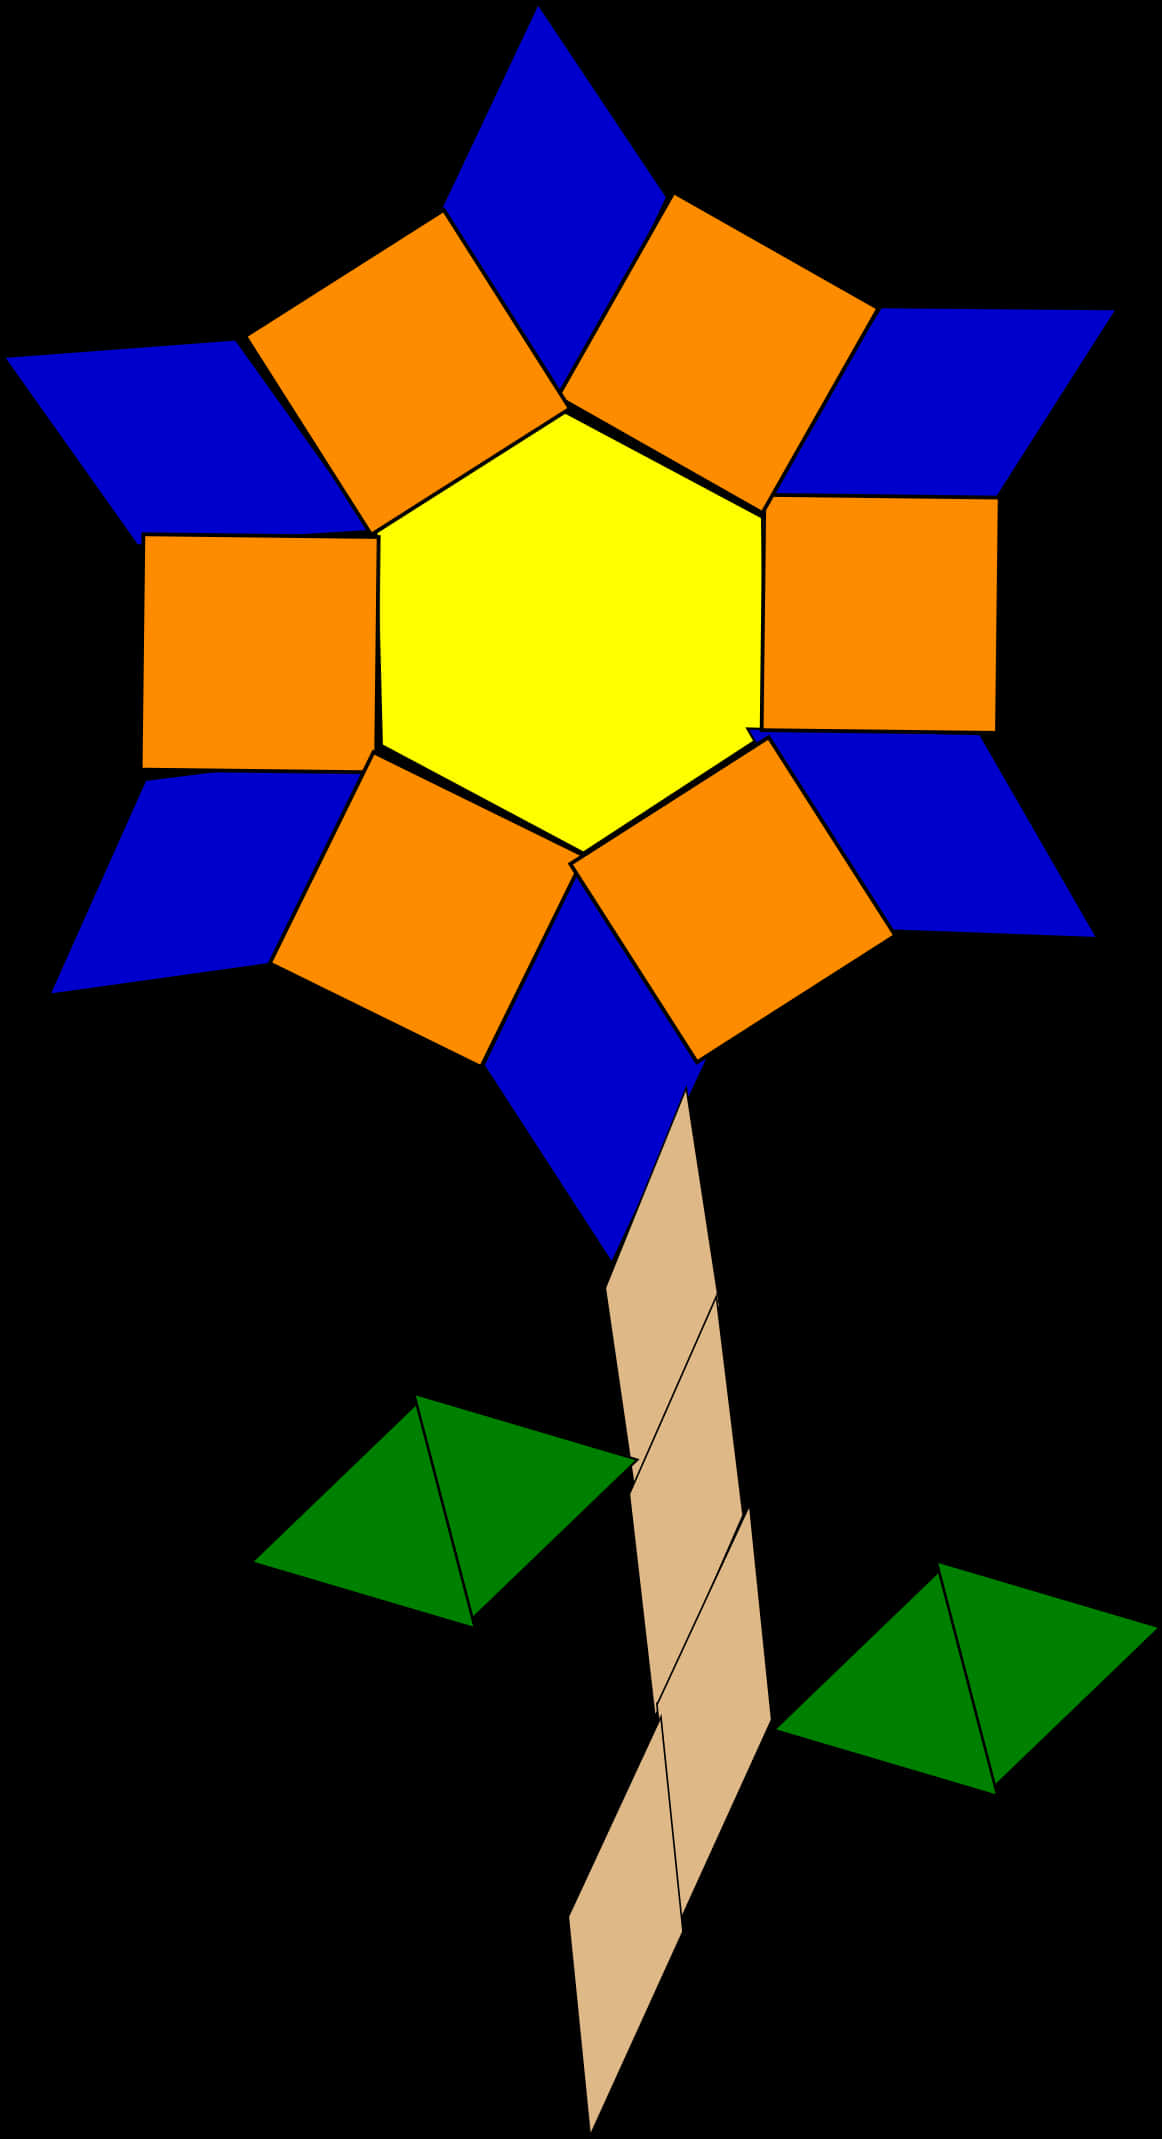 A Flower Made Out Of Squares